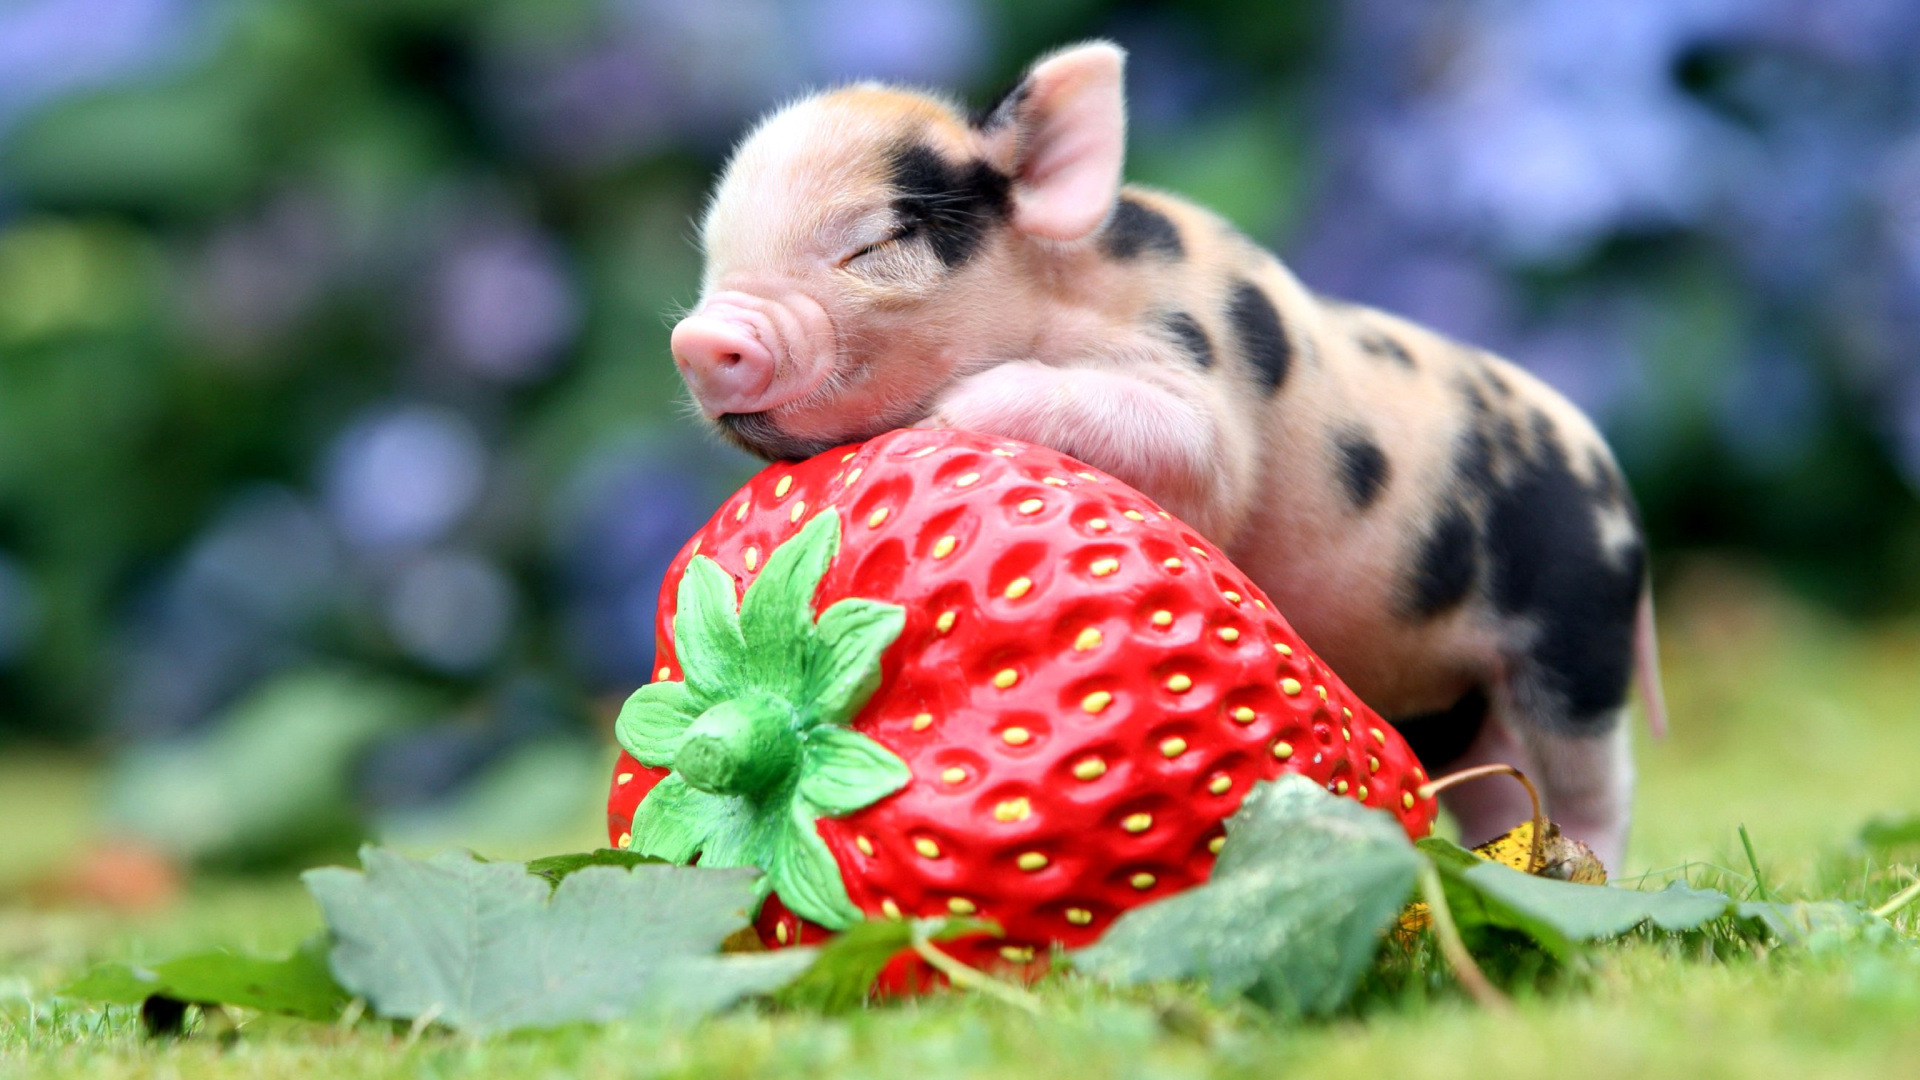 Pig and Strawberry wallpaper 1920x1080